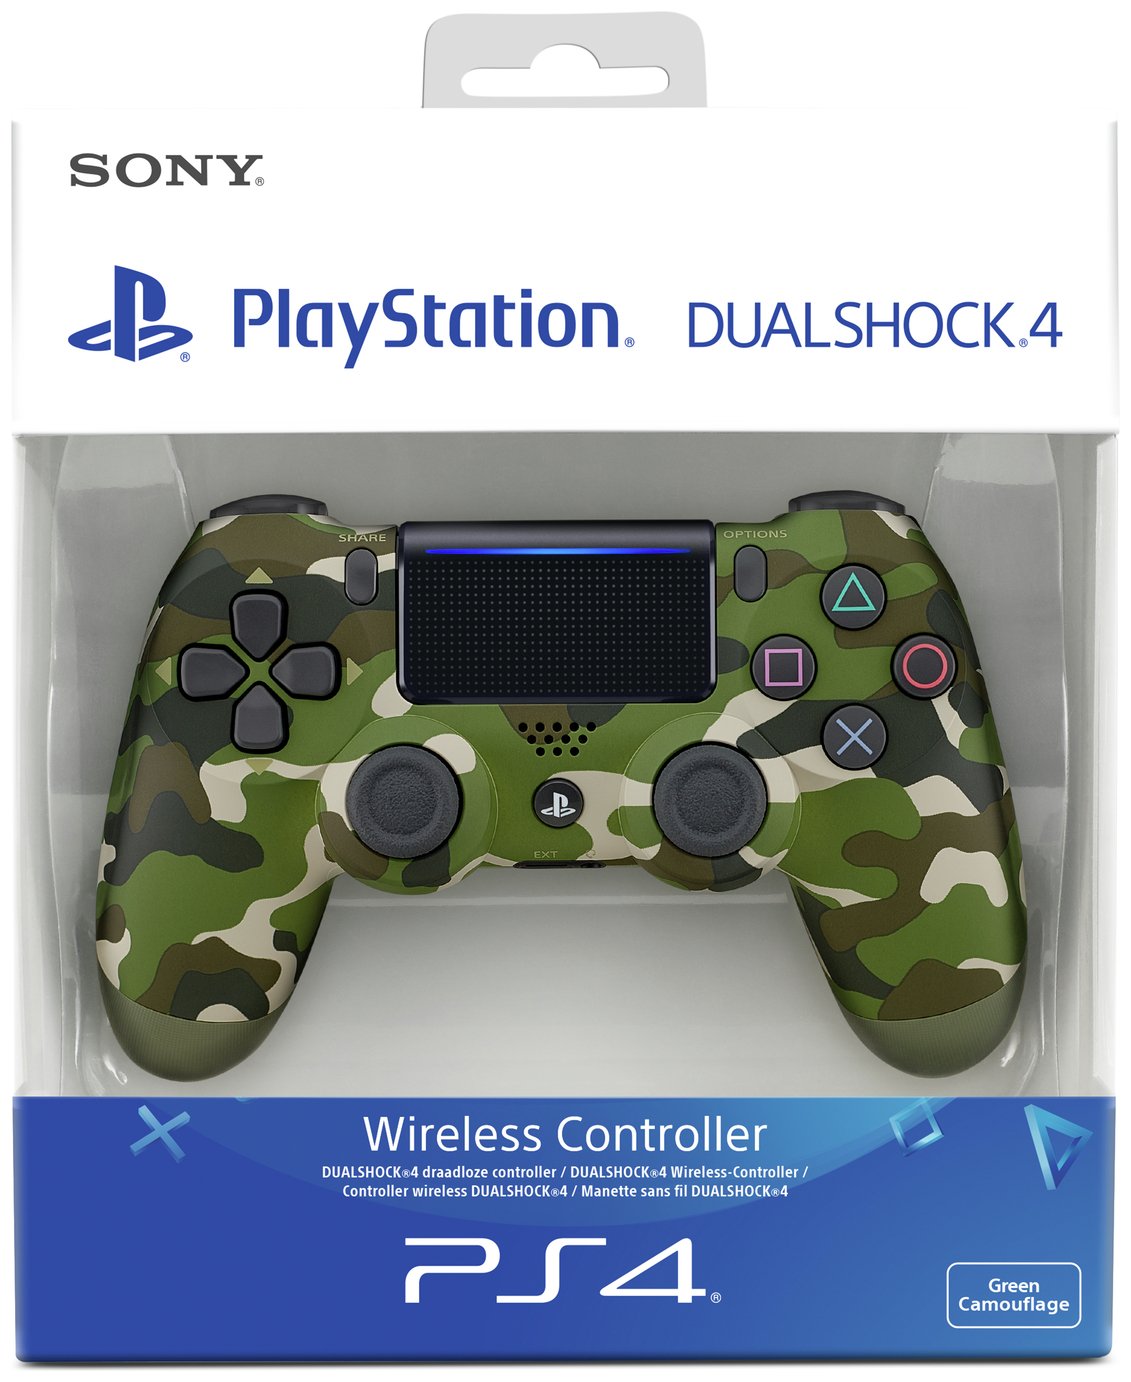 PS4 DualShock 4 V2 Wireless Controller Review